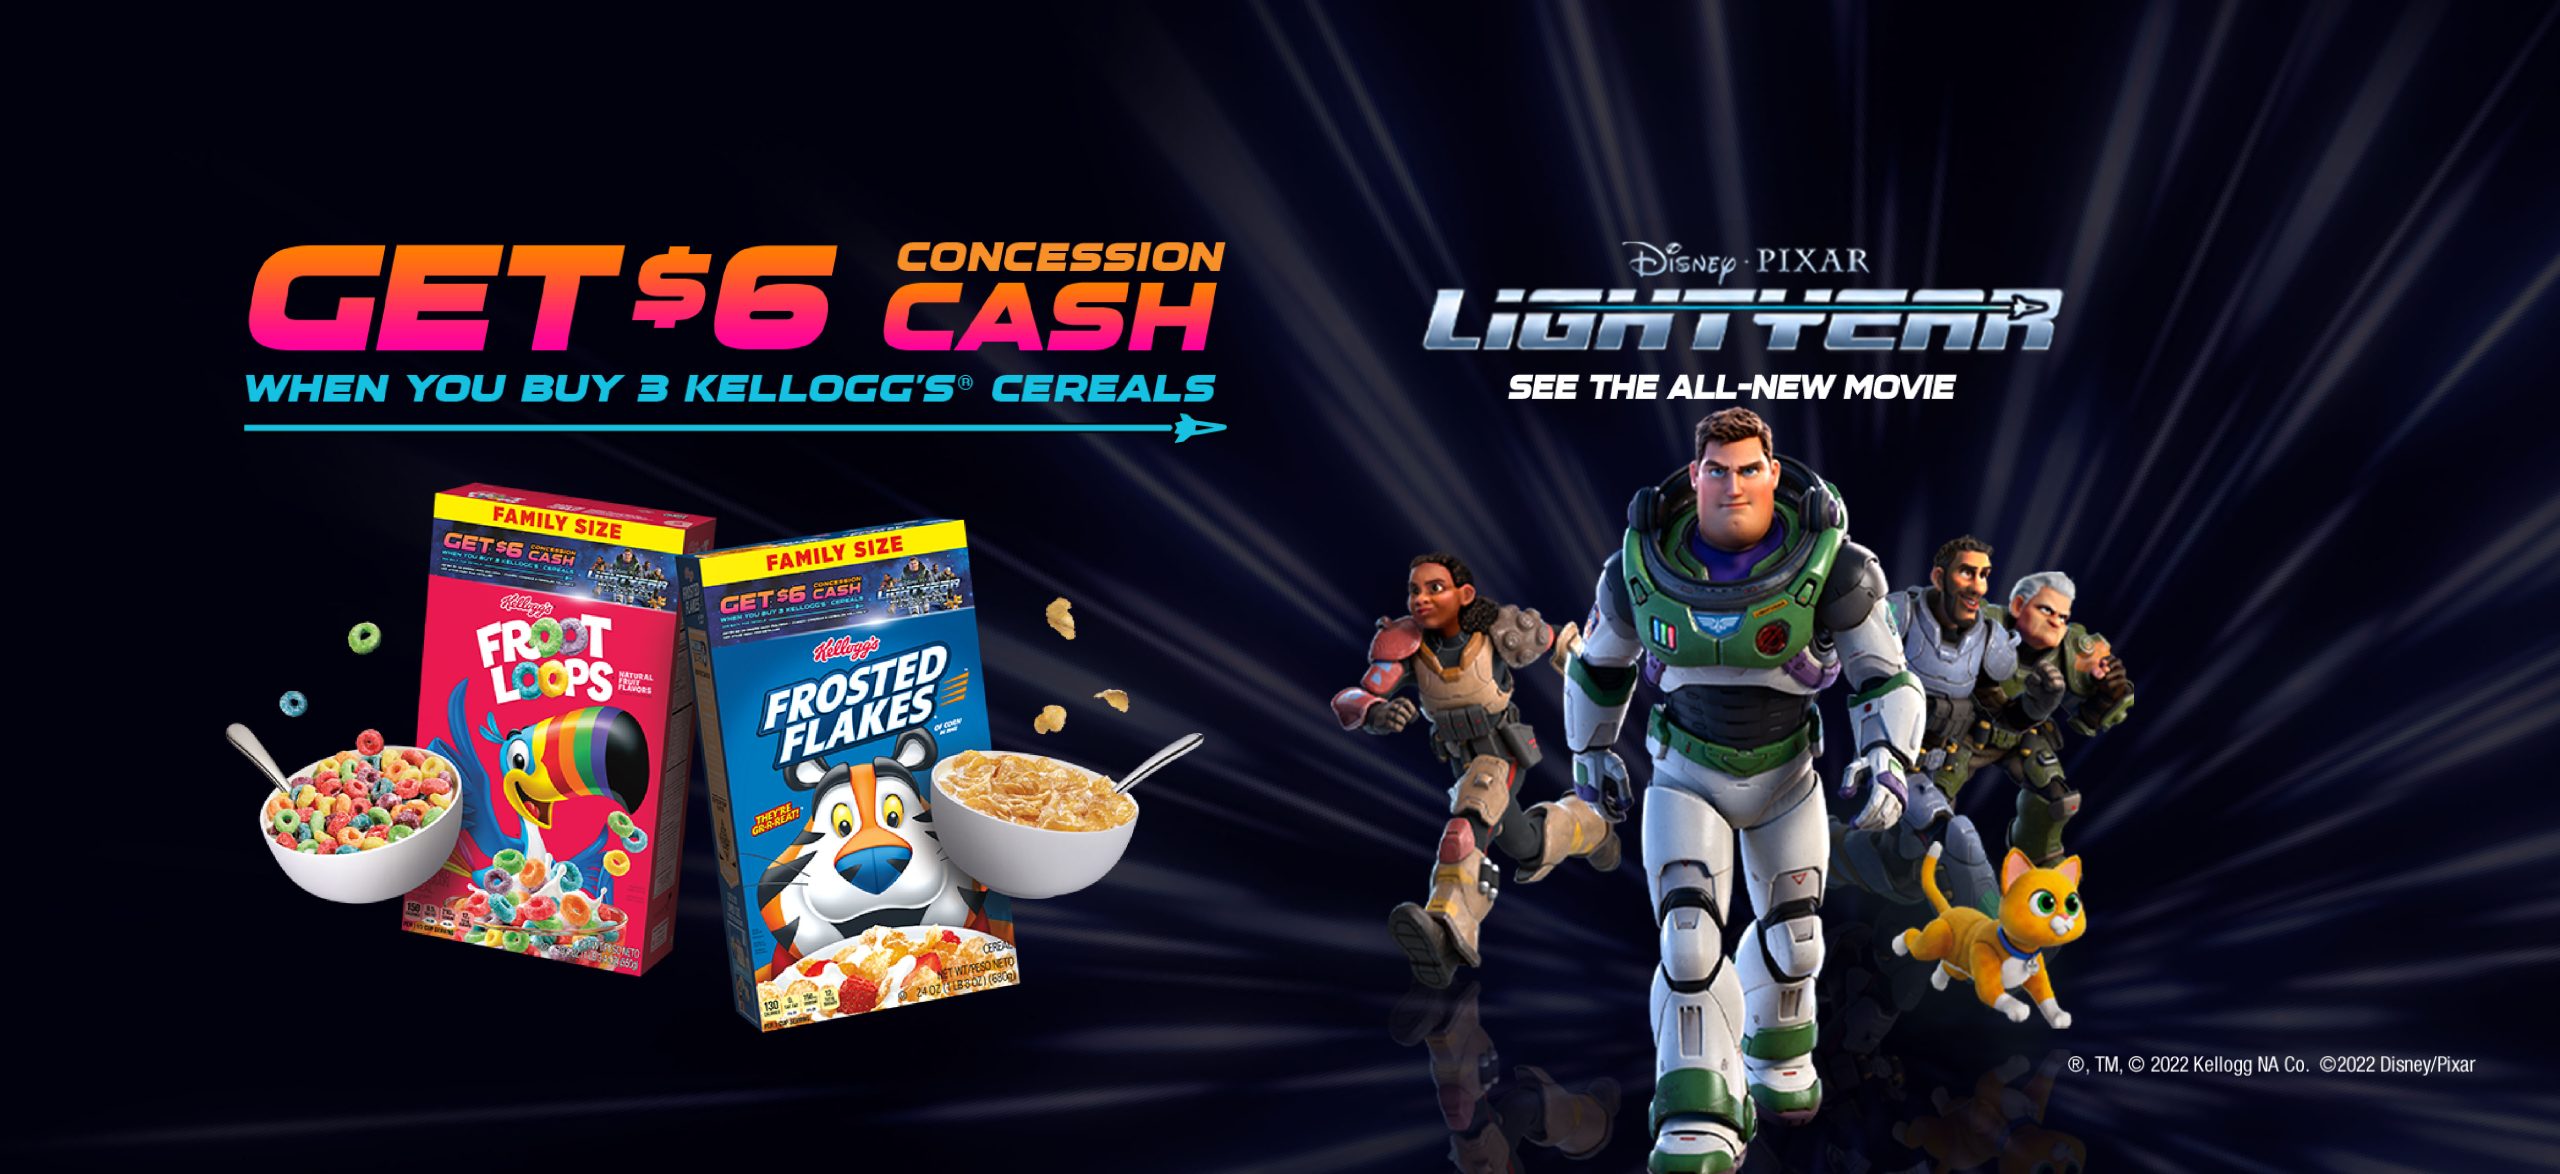 Get $6 Concession Cash When You Buy 3 Kellogg's Cereal